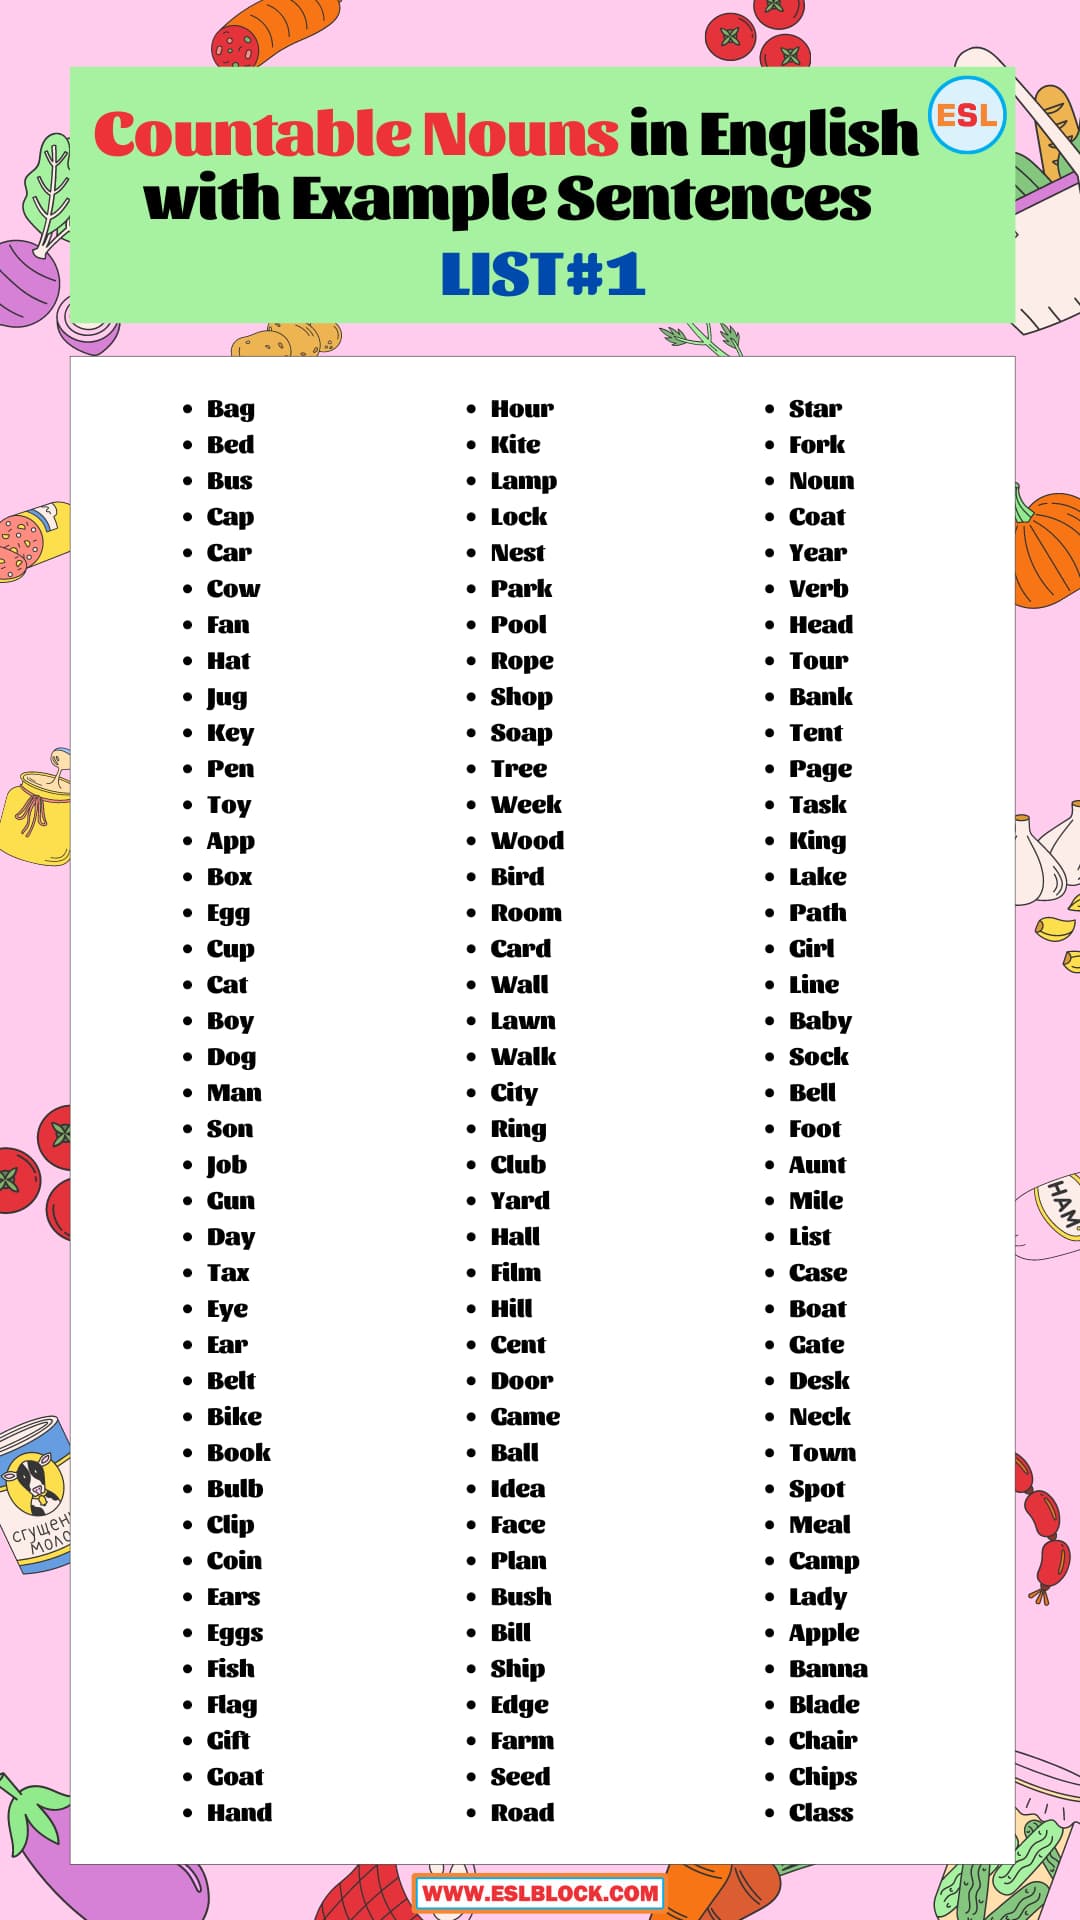 100 Example Sentences Using Countable, All Countable nouns, Countable Nouns, Countable nouns list, Countable Nouns Vocabulary, Countable Nouns with Example Sentences, List of Countable nouns, Types of Nouns, Types of Nouns with Example Sentences, What are Concrete Nouns, What are Nouns, What are the types of Nouns, What is a Noun